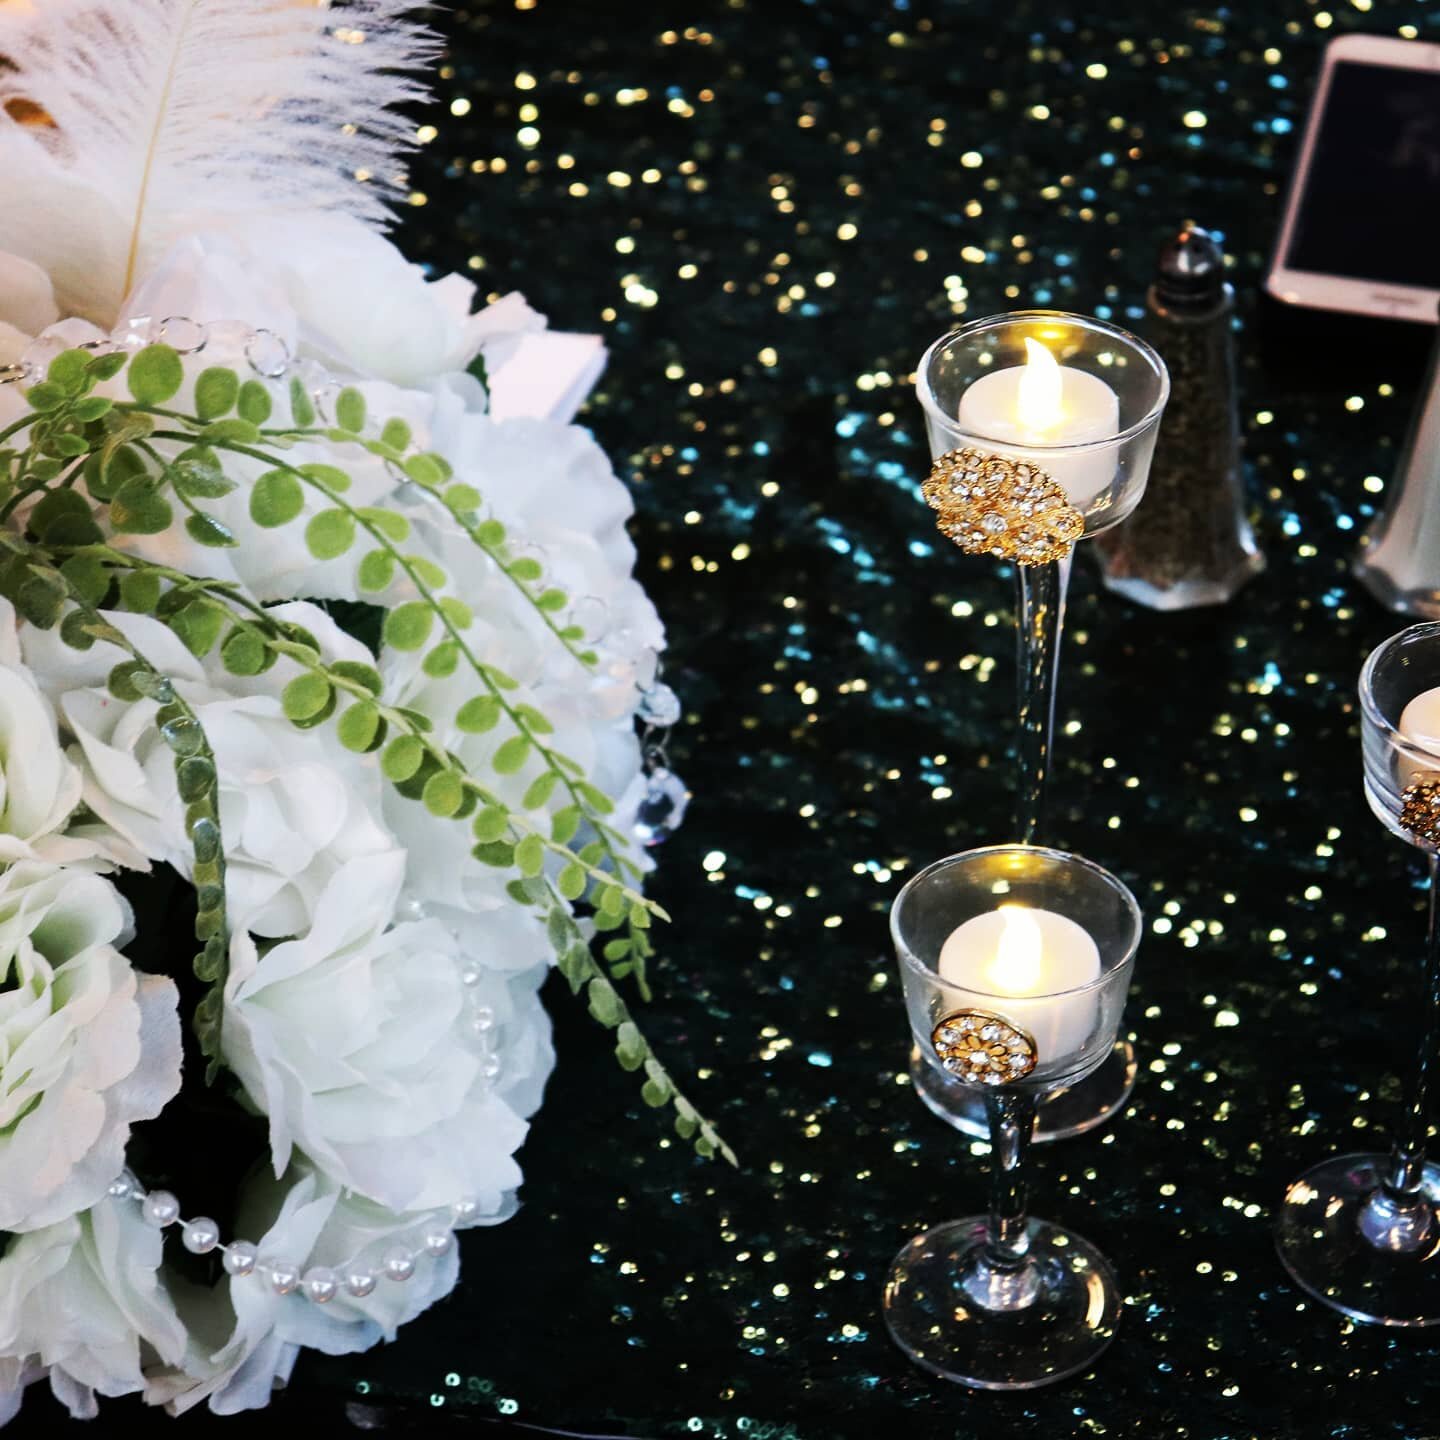 Roaring 20s with a touch of added jewels to the tealight holders. #JSEventCustom